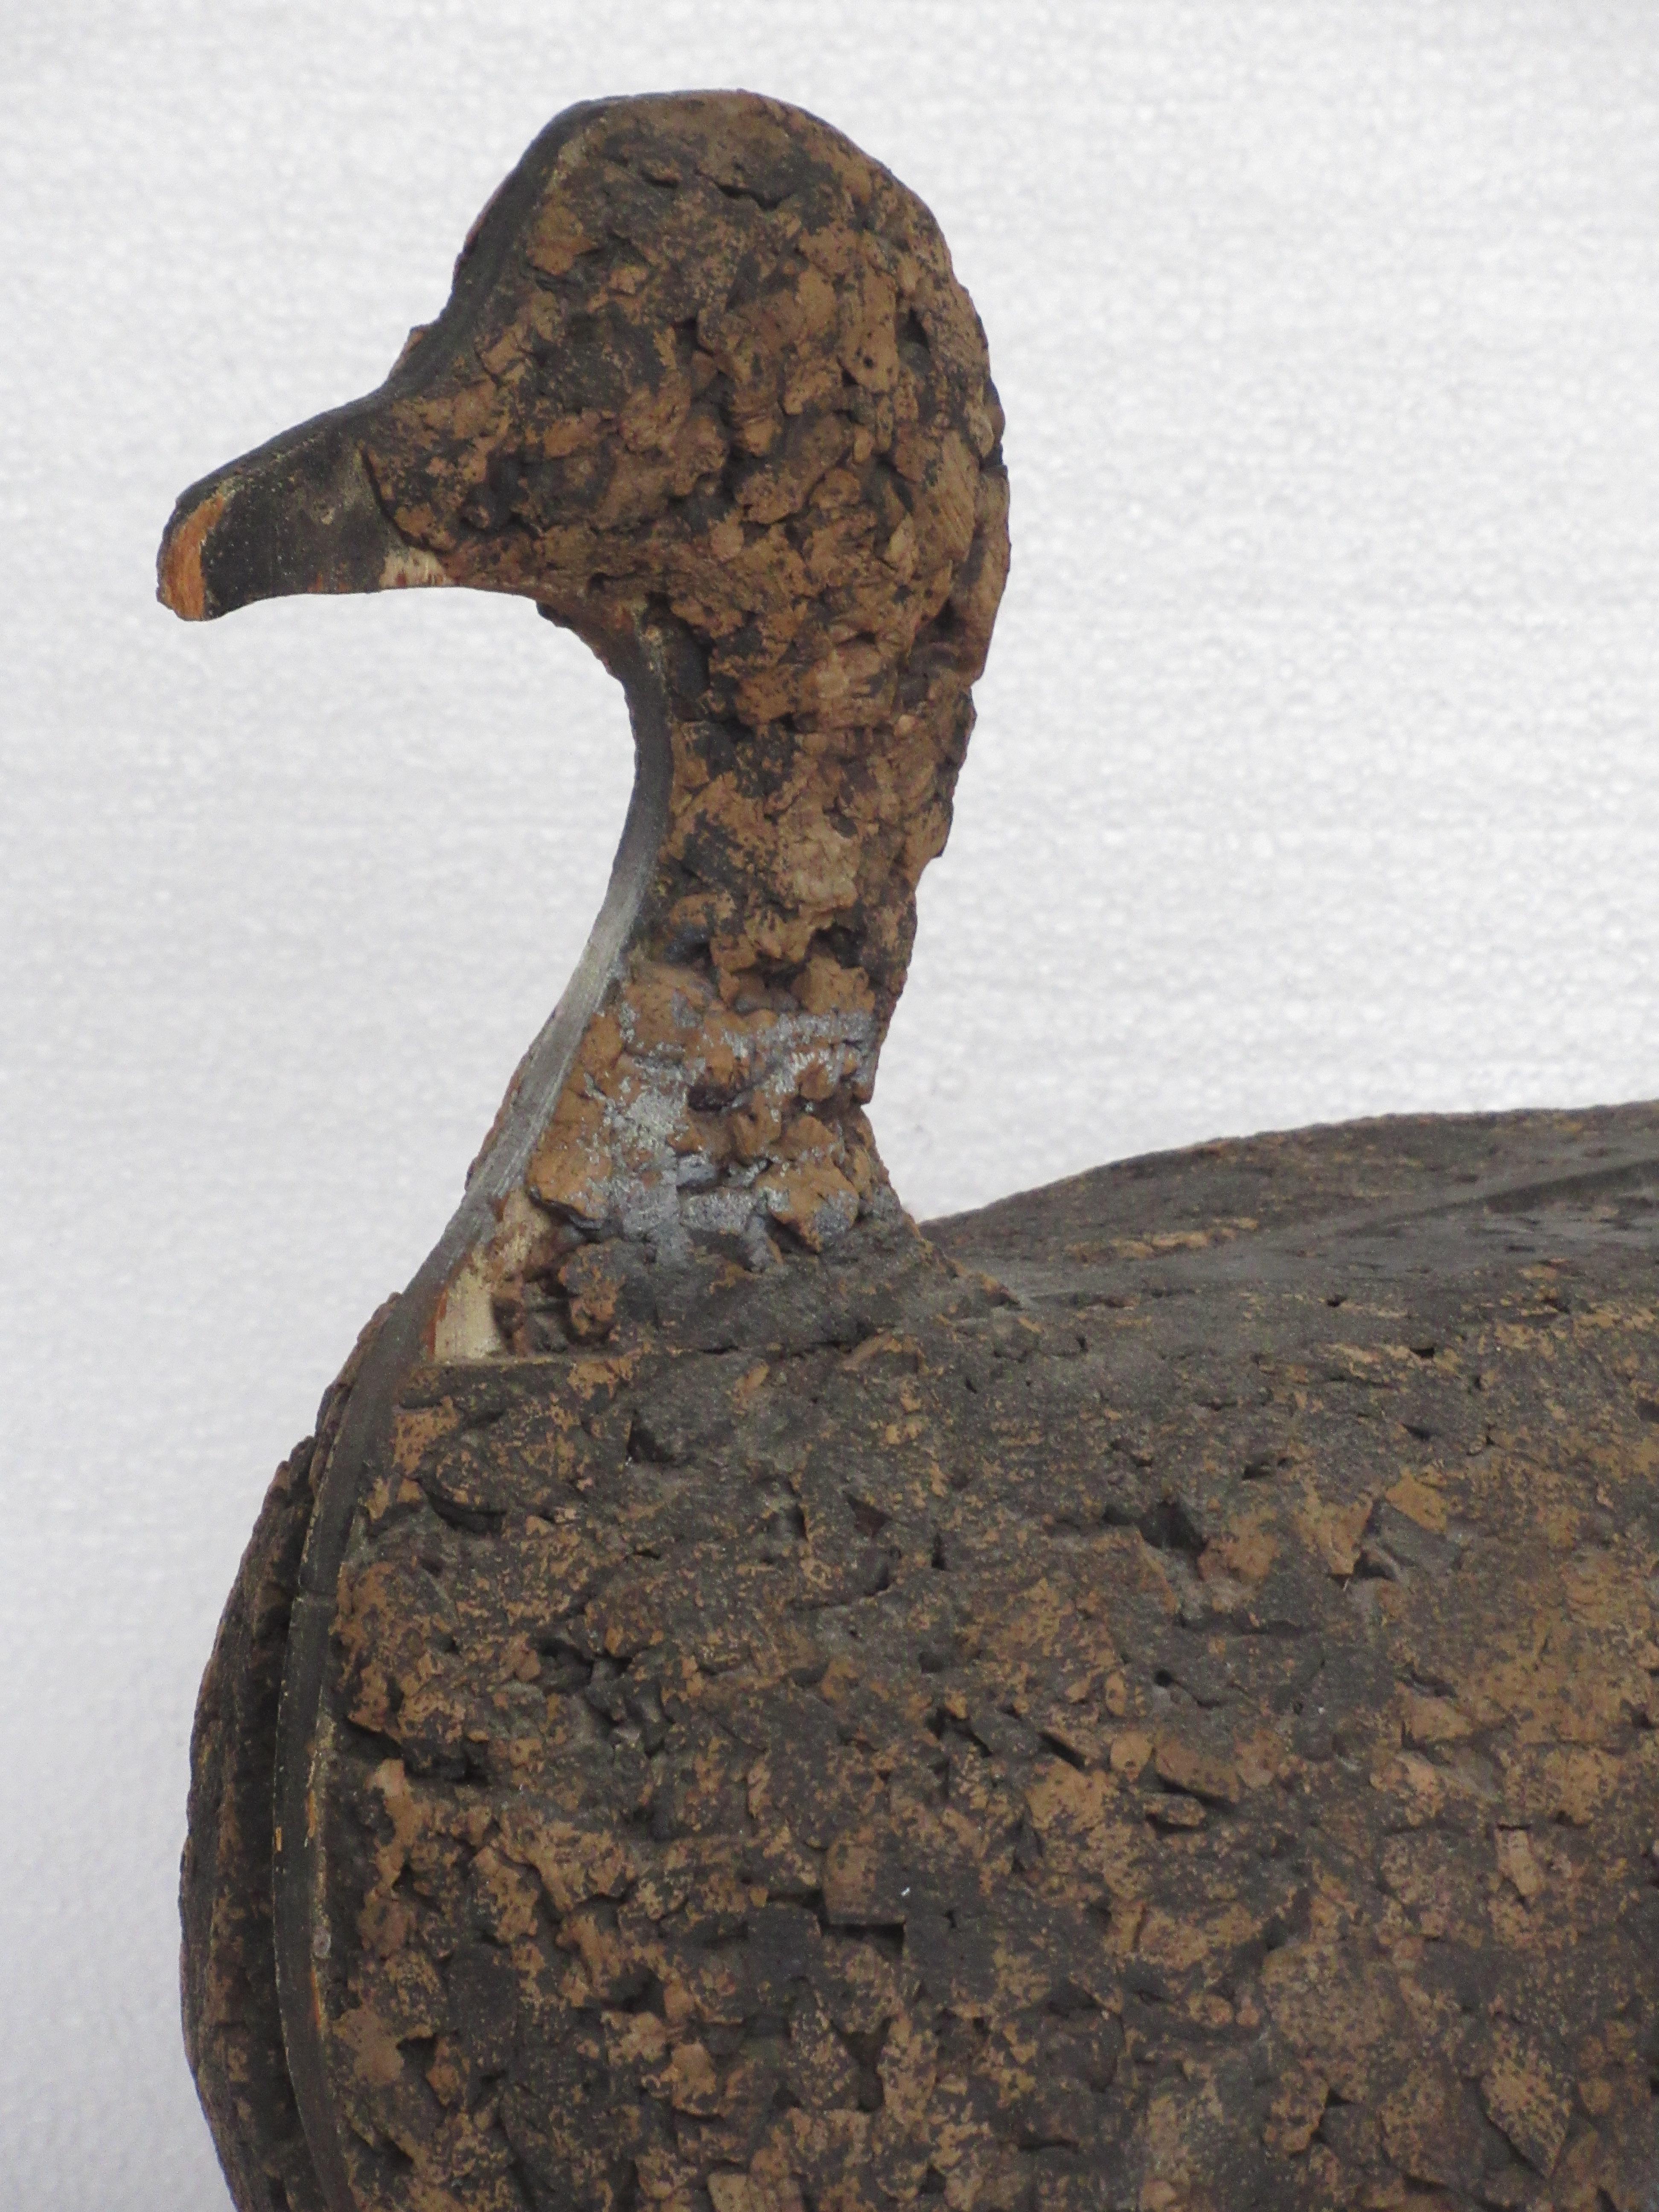 Antique American Folk Art large-scale working cork Canadian goose duck decoy that is fully divided by wood in center that ends in both a wood beak and a wood bottom rudder. It is incise signed at painted wood rudder but cannot clearly make out the